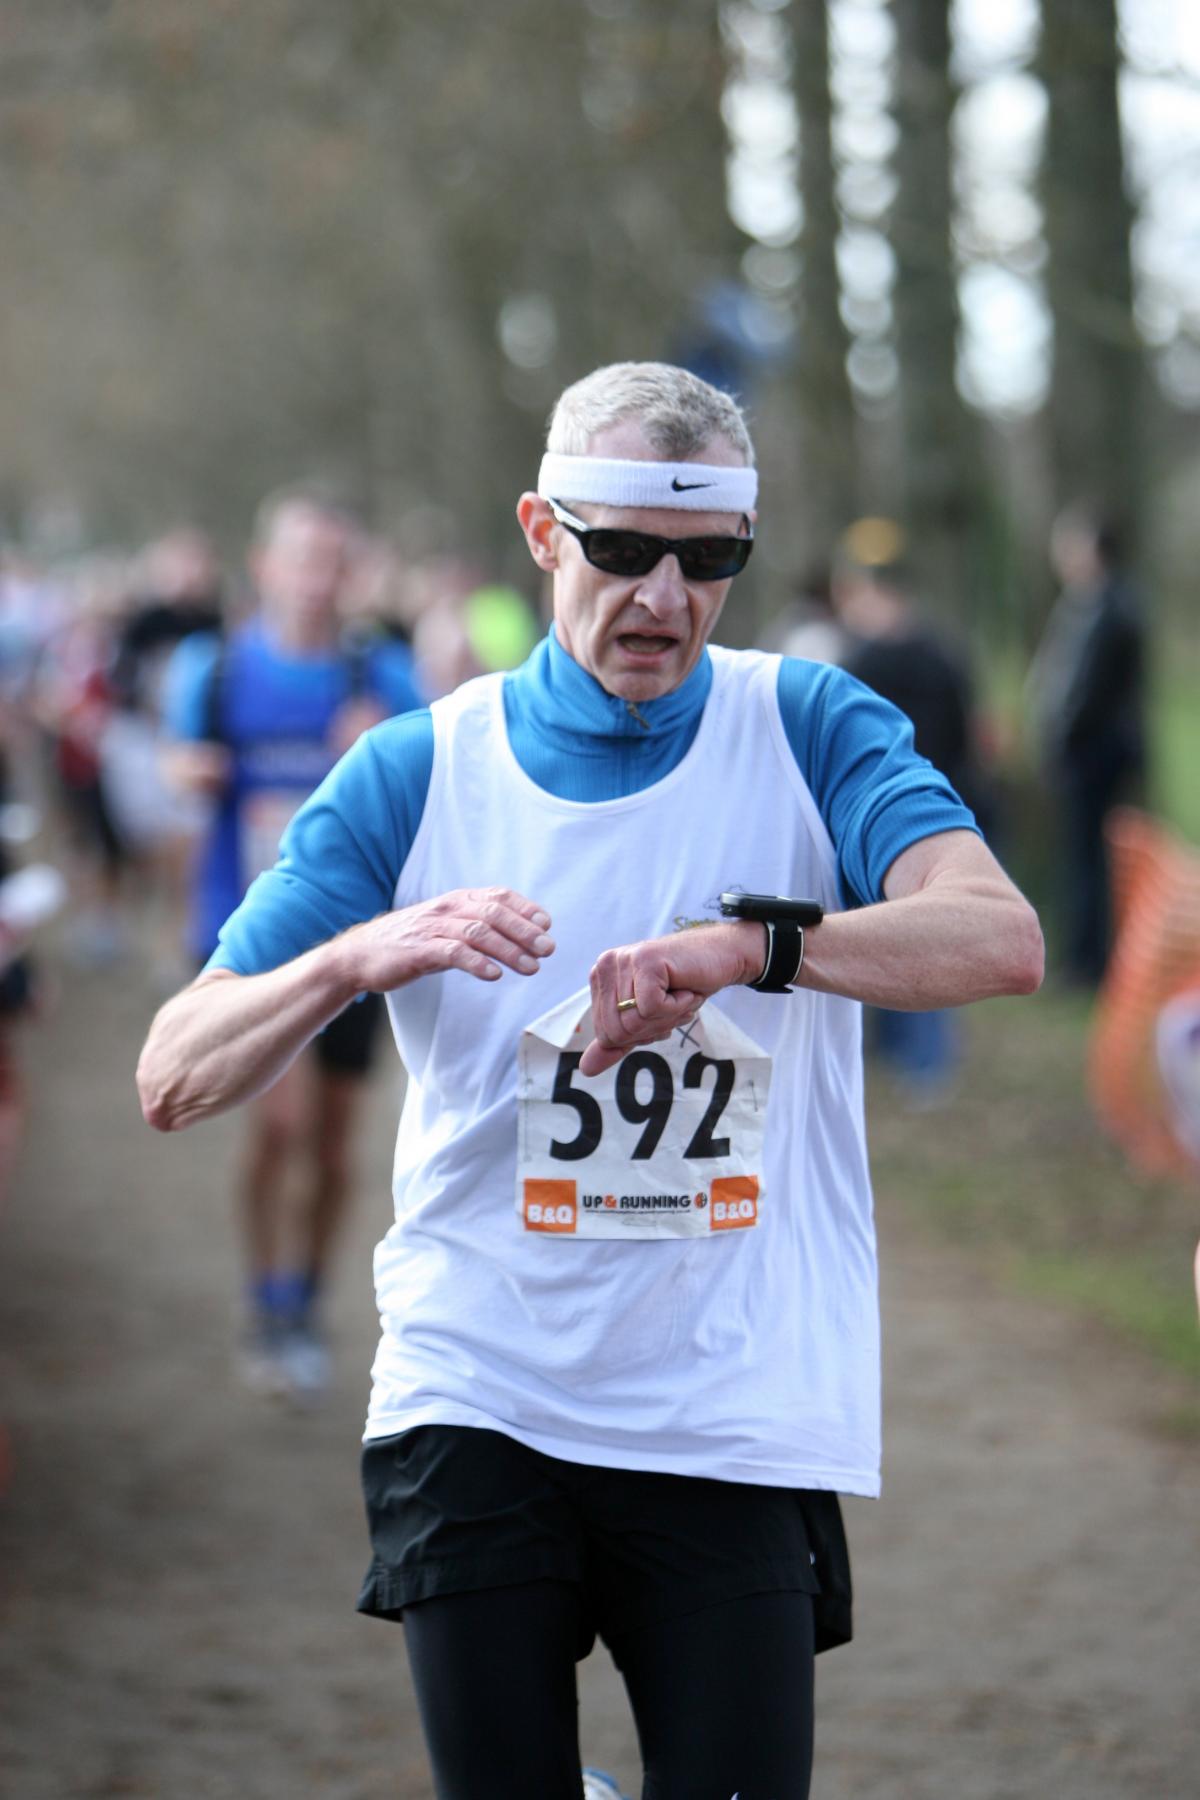 Pictures from the Eastleigh 10k 2014